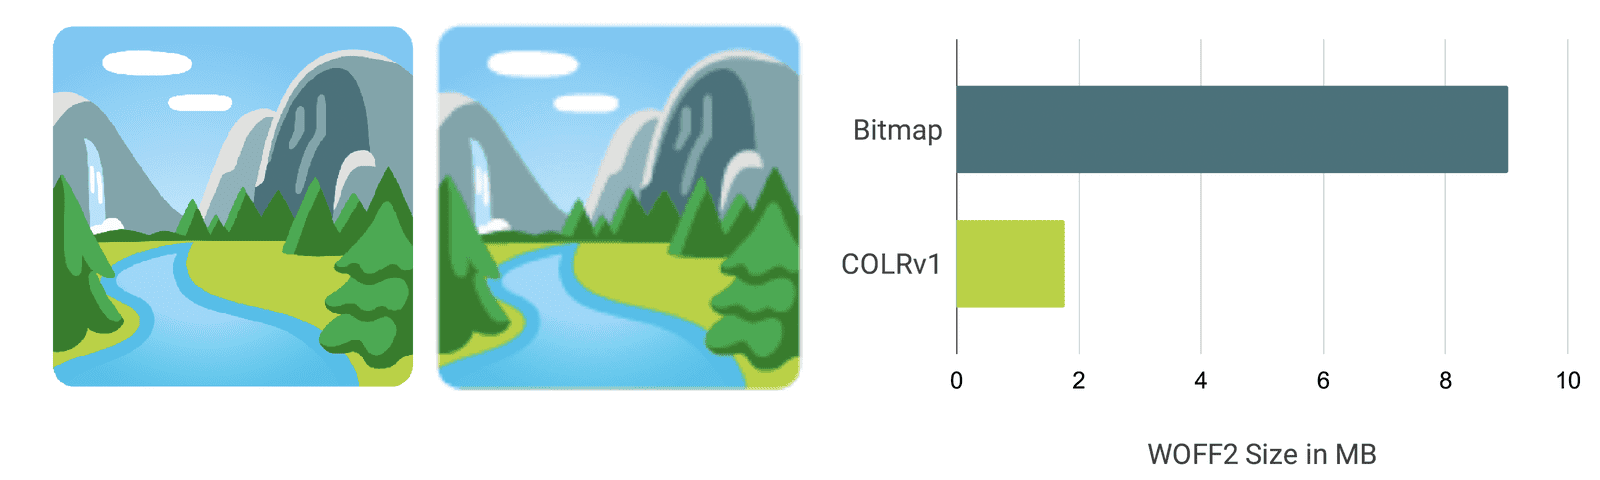 Comparison visualization and bar chart, showing how COLRv1 fonts are sharper and smaller.